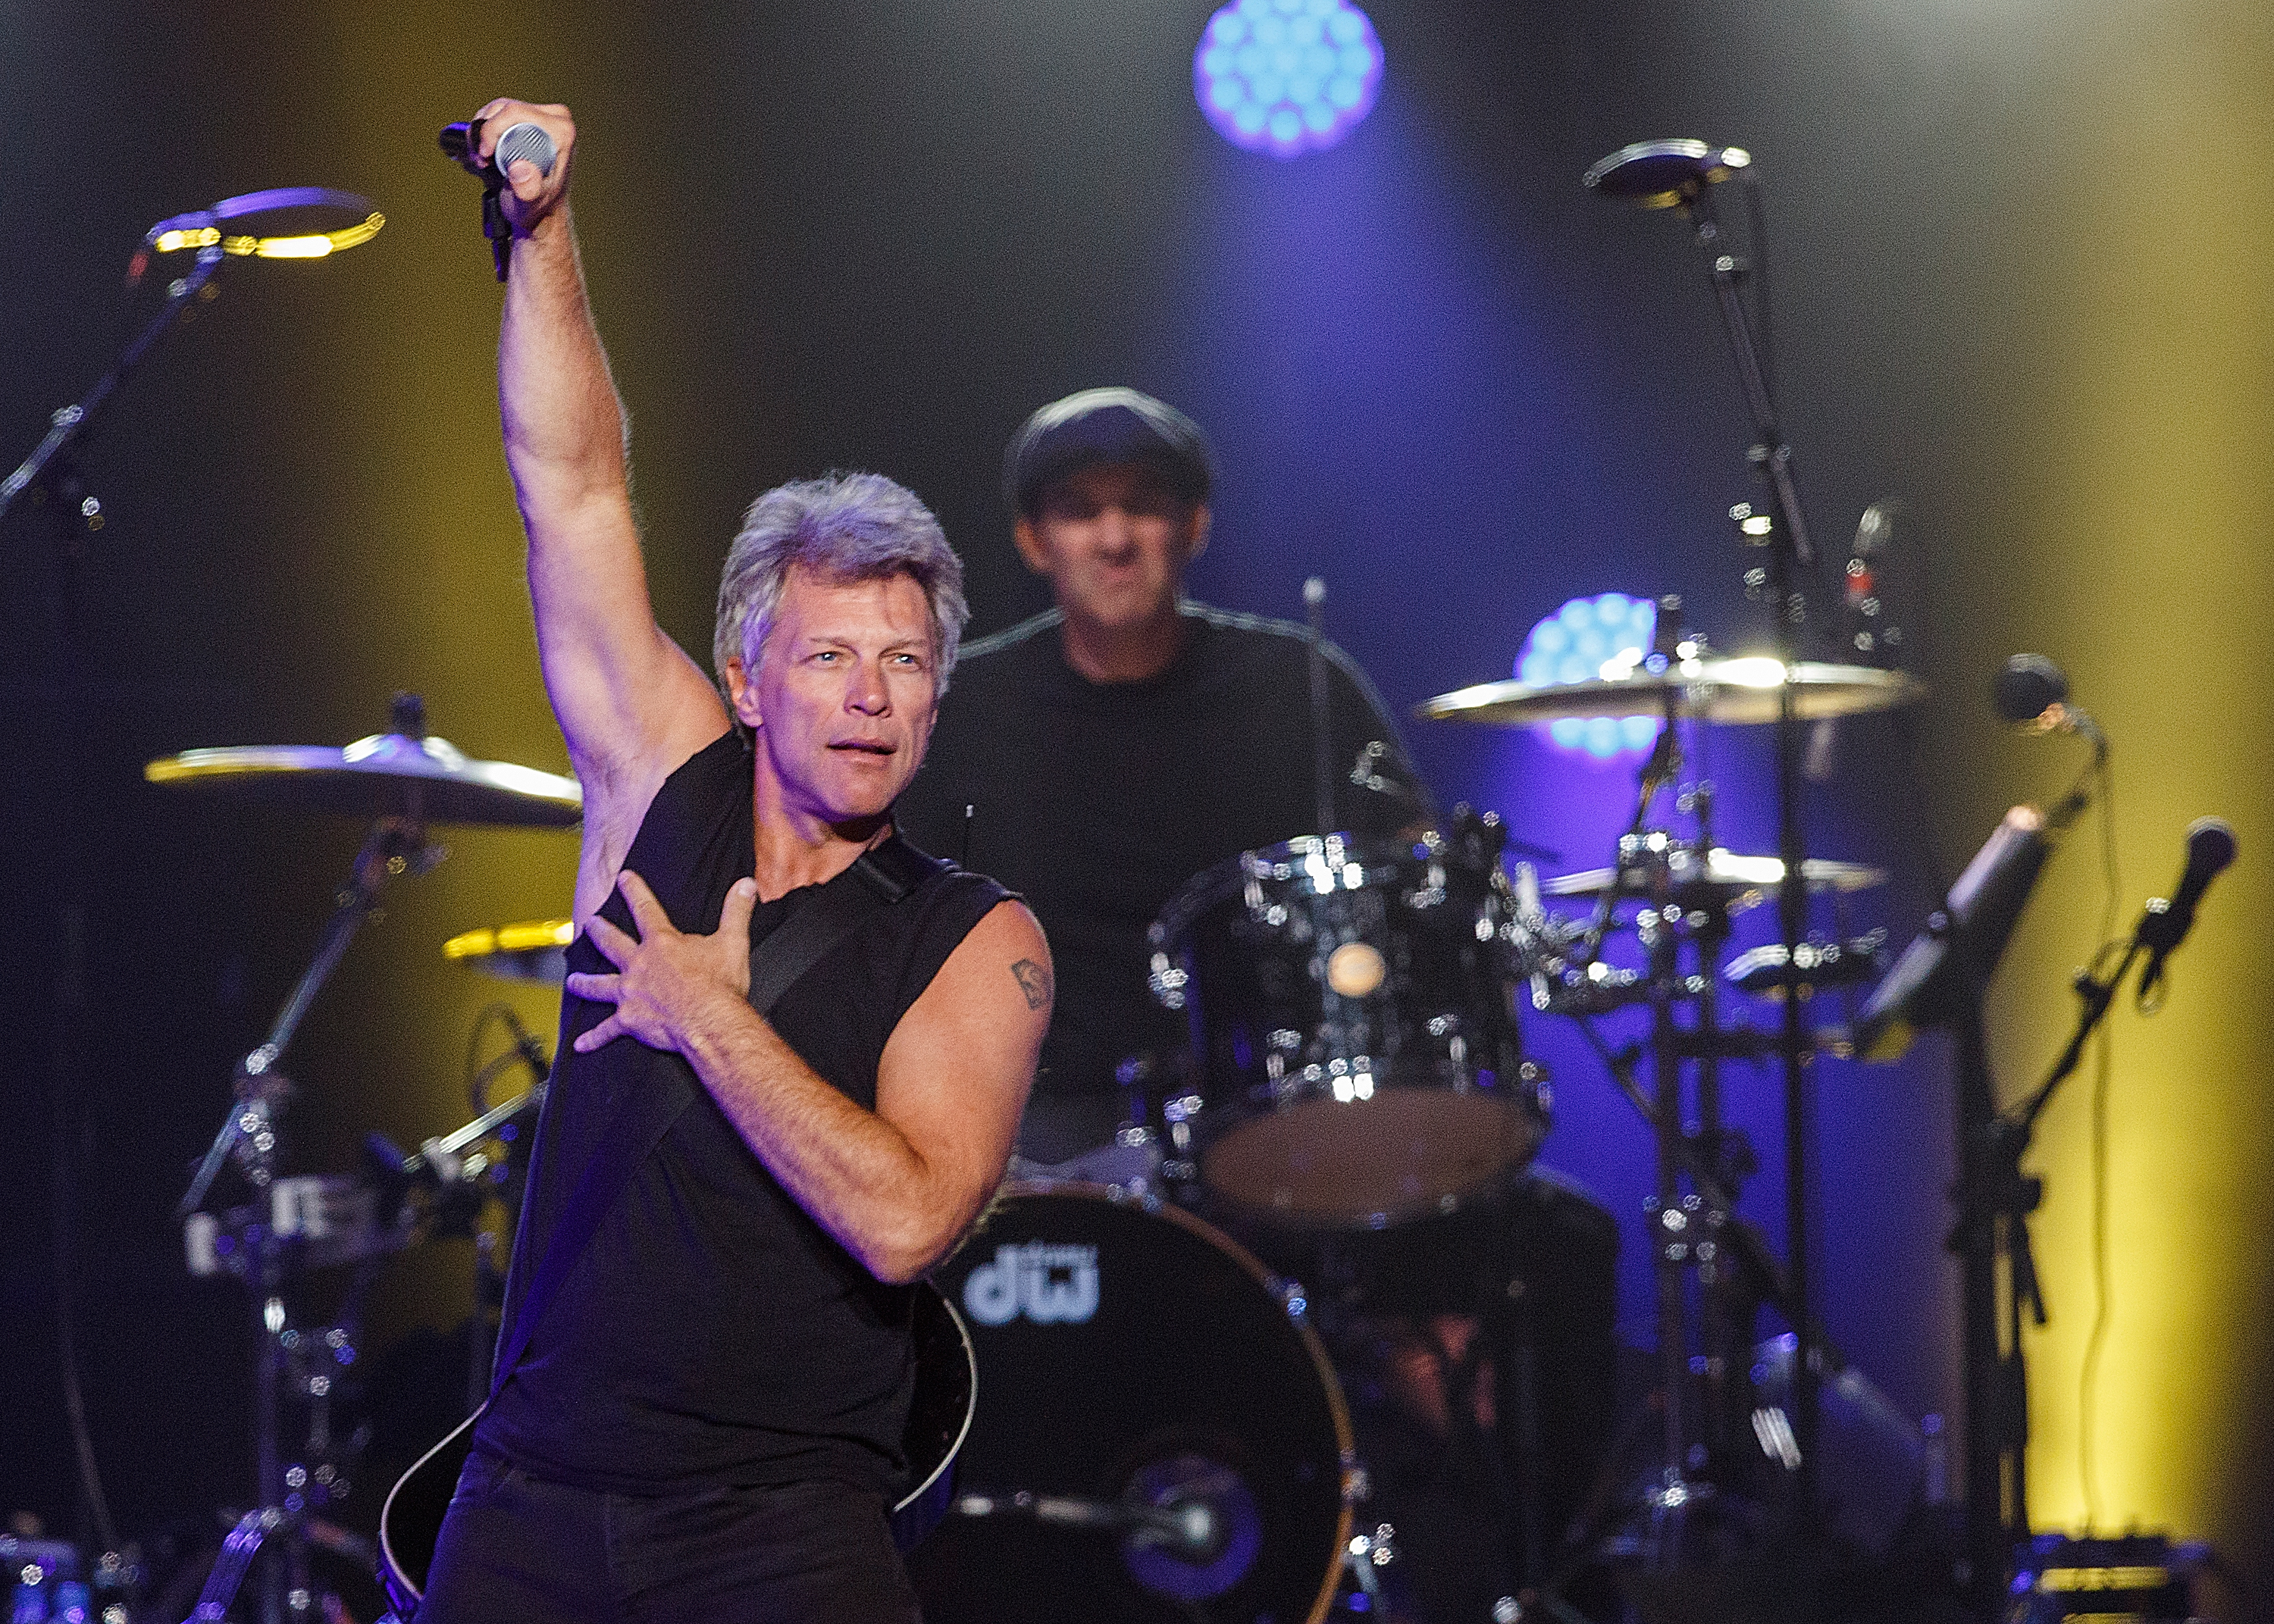 Musician Jon Bon Jovi of Bon Jovi performs onstage at Rogers Arena in Vancouver on Aug. 22, 2015 (Andrew Chin—Getty Images)